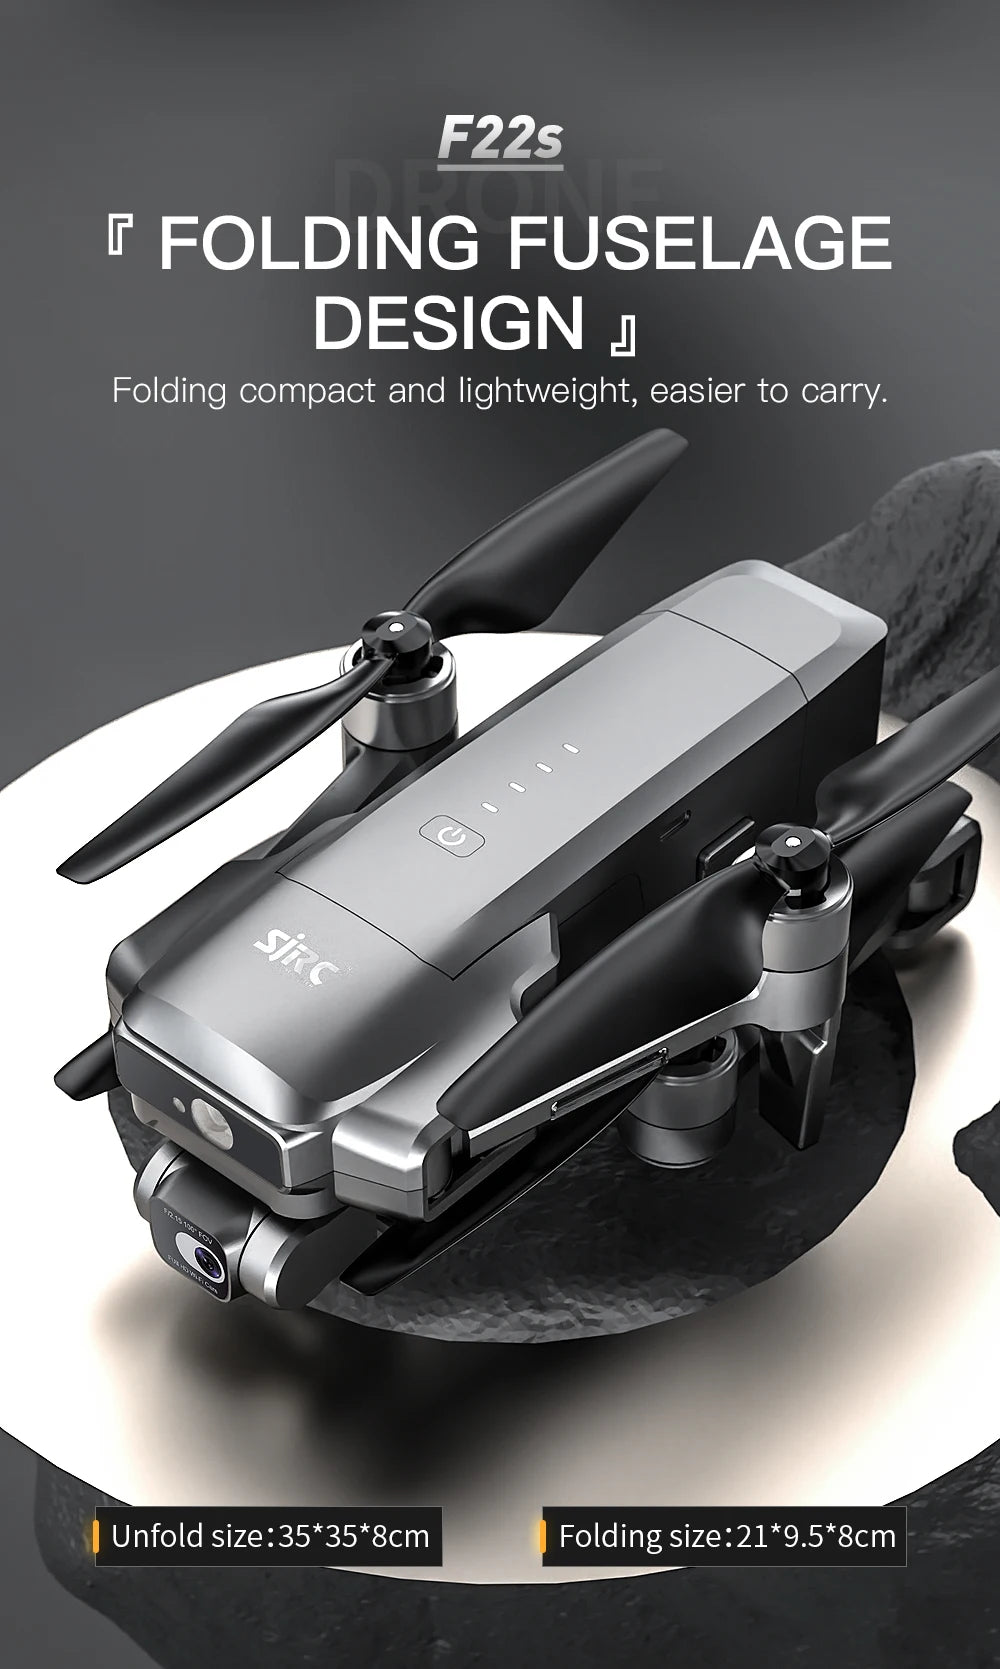 SJRC F22S 4K HD PRO Drone, Folding compact and lightweight; easier to carry . Folding size:21*9.5*